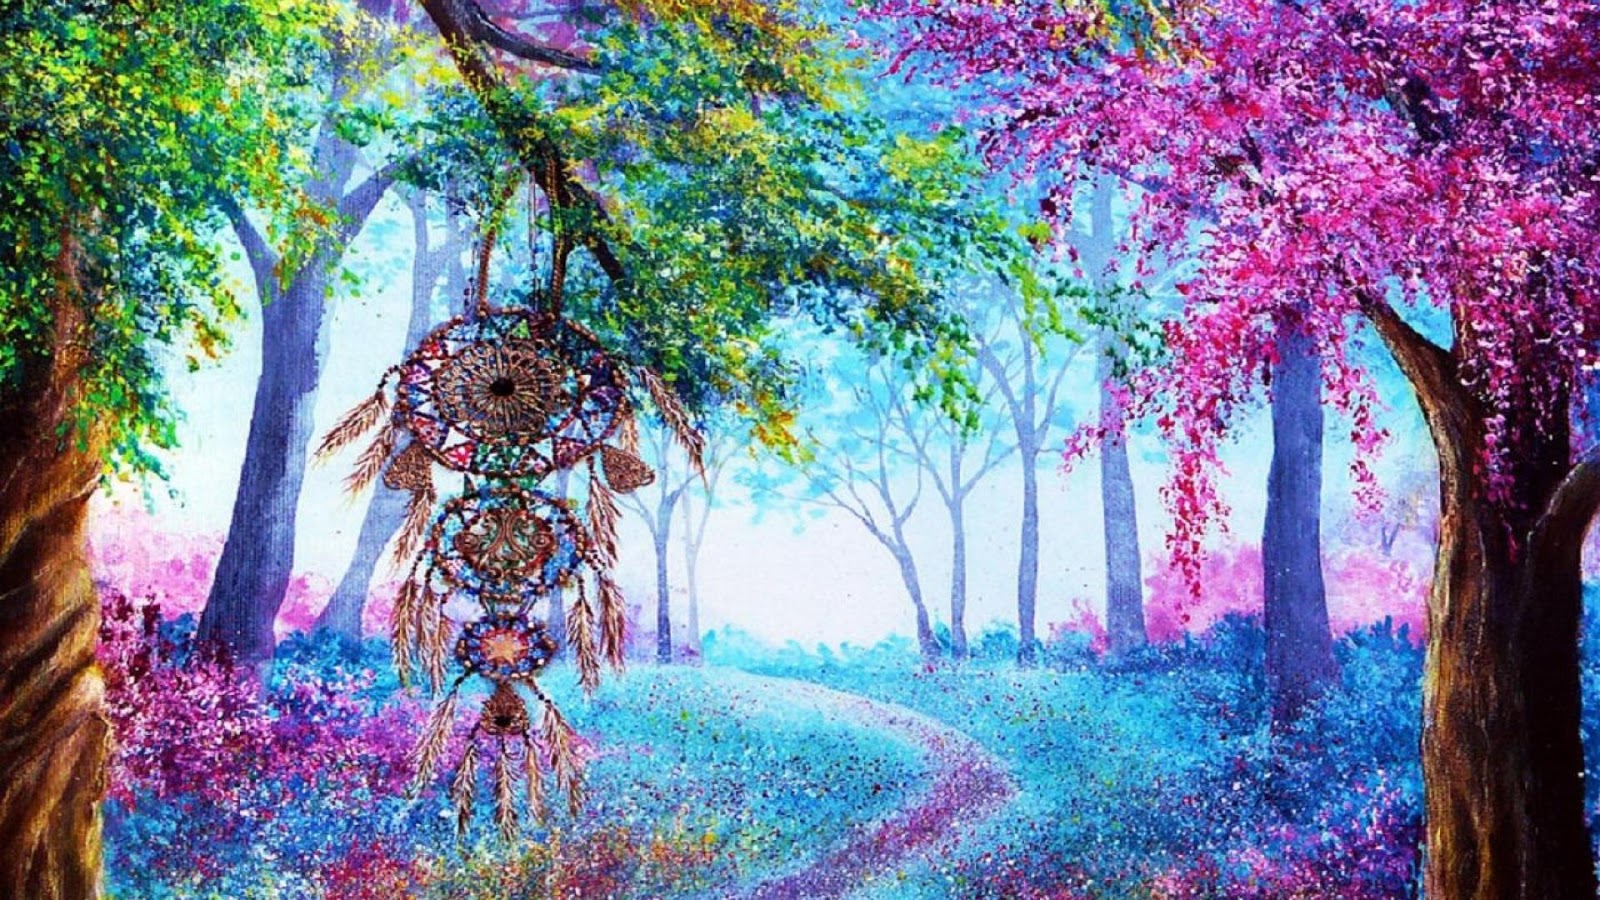 dreamcatcher, artistic, colorful, forest, path